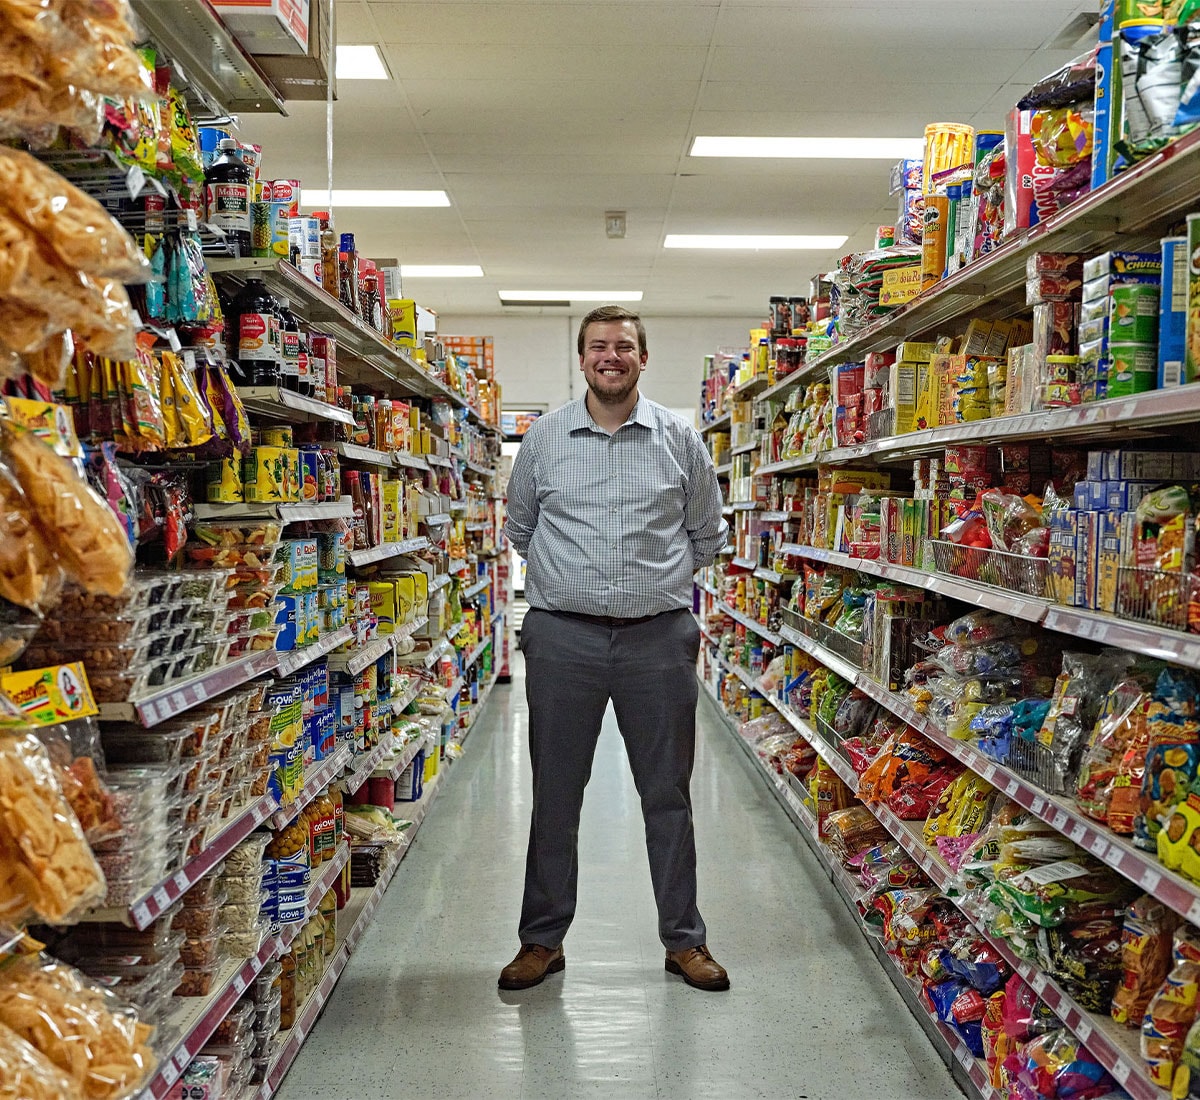 A man with a big smile is standing between shelves of food at a grocery store